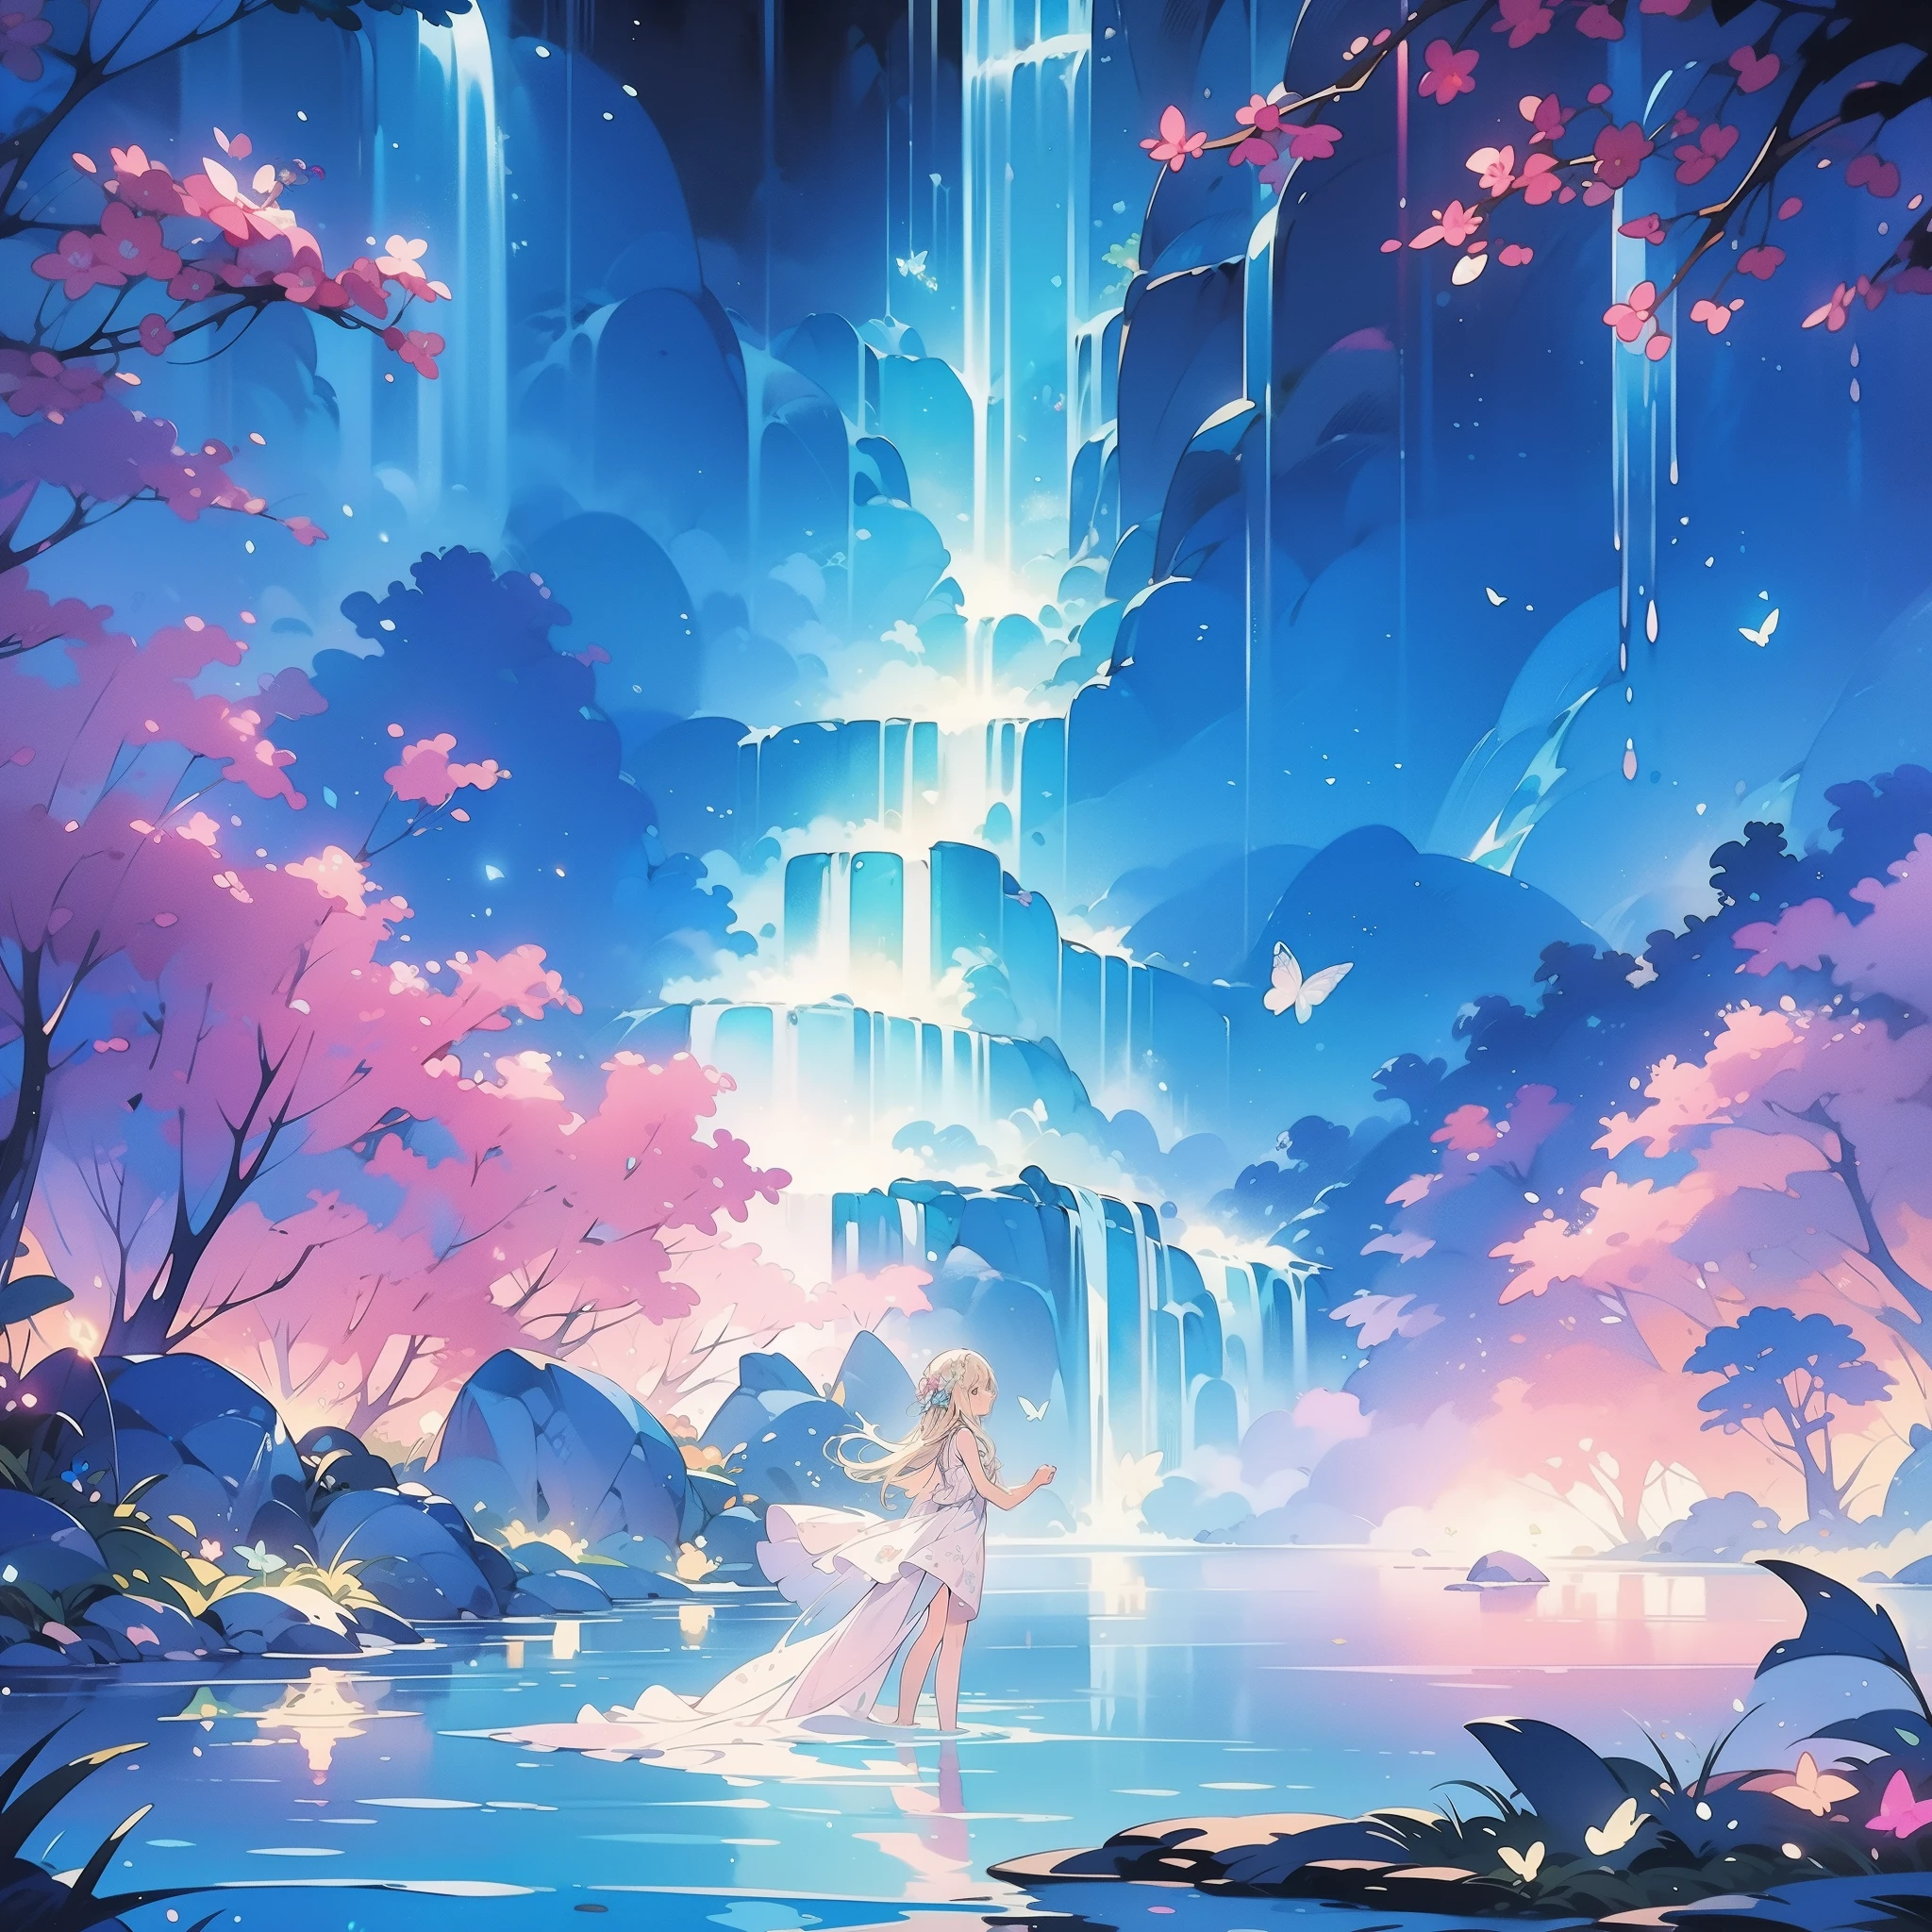 watercolor illustration, vibrant pastel colors, dreamy, colorful, whimsical, magical, masterpiece, best quality, sharp focus, intricately detailed environment, fine detail, 8k resolution, waterfall lagoon, (magical lagoon), (waterfall, lake), glowing lights, fireflies, glowing butterflies, fairy creatures, glowing fairies, beautiful girl in sparkling delicate white dress